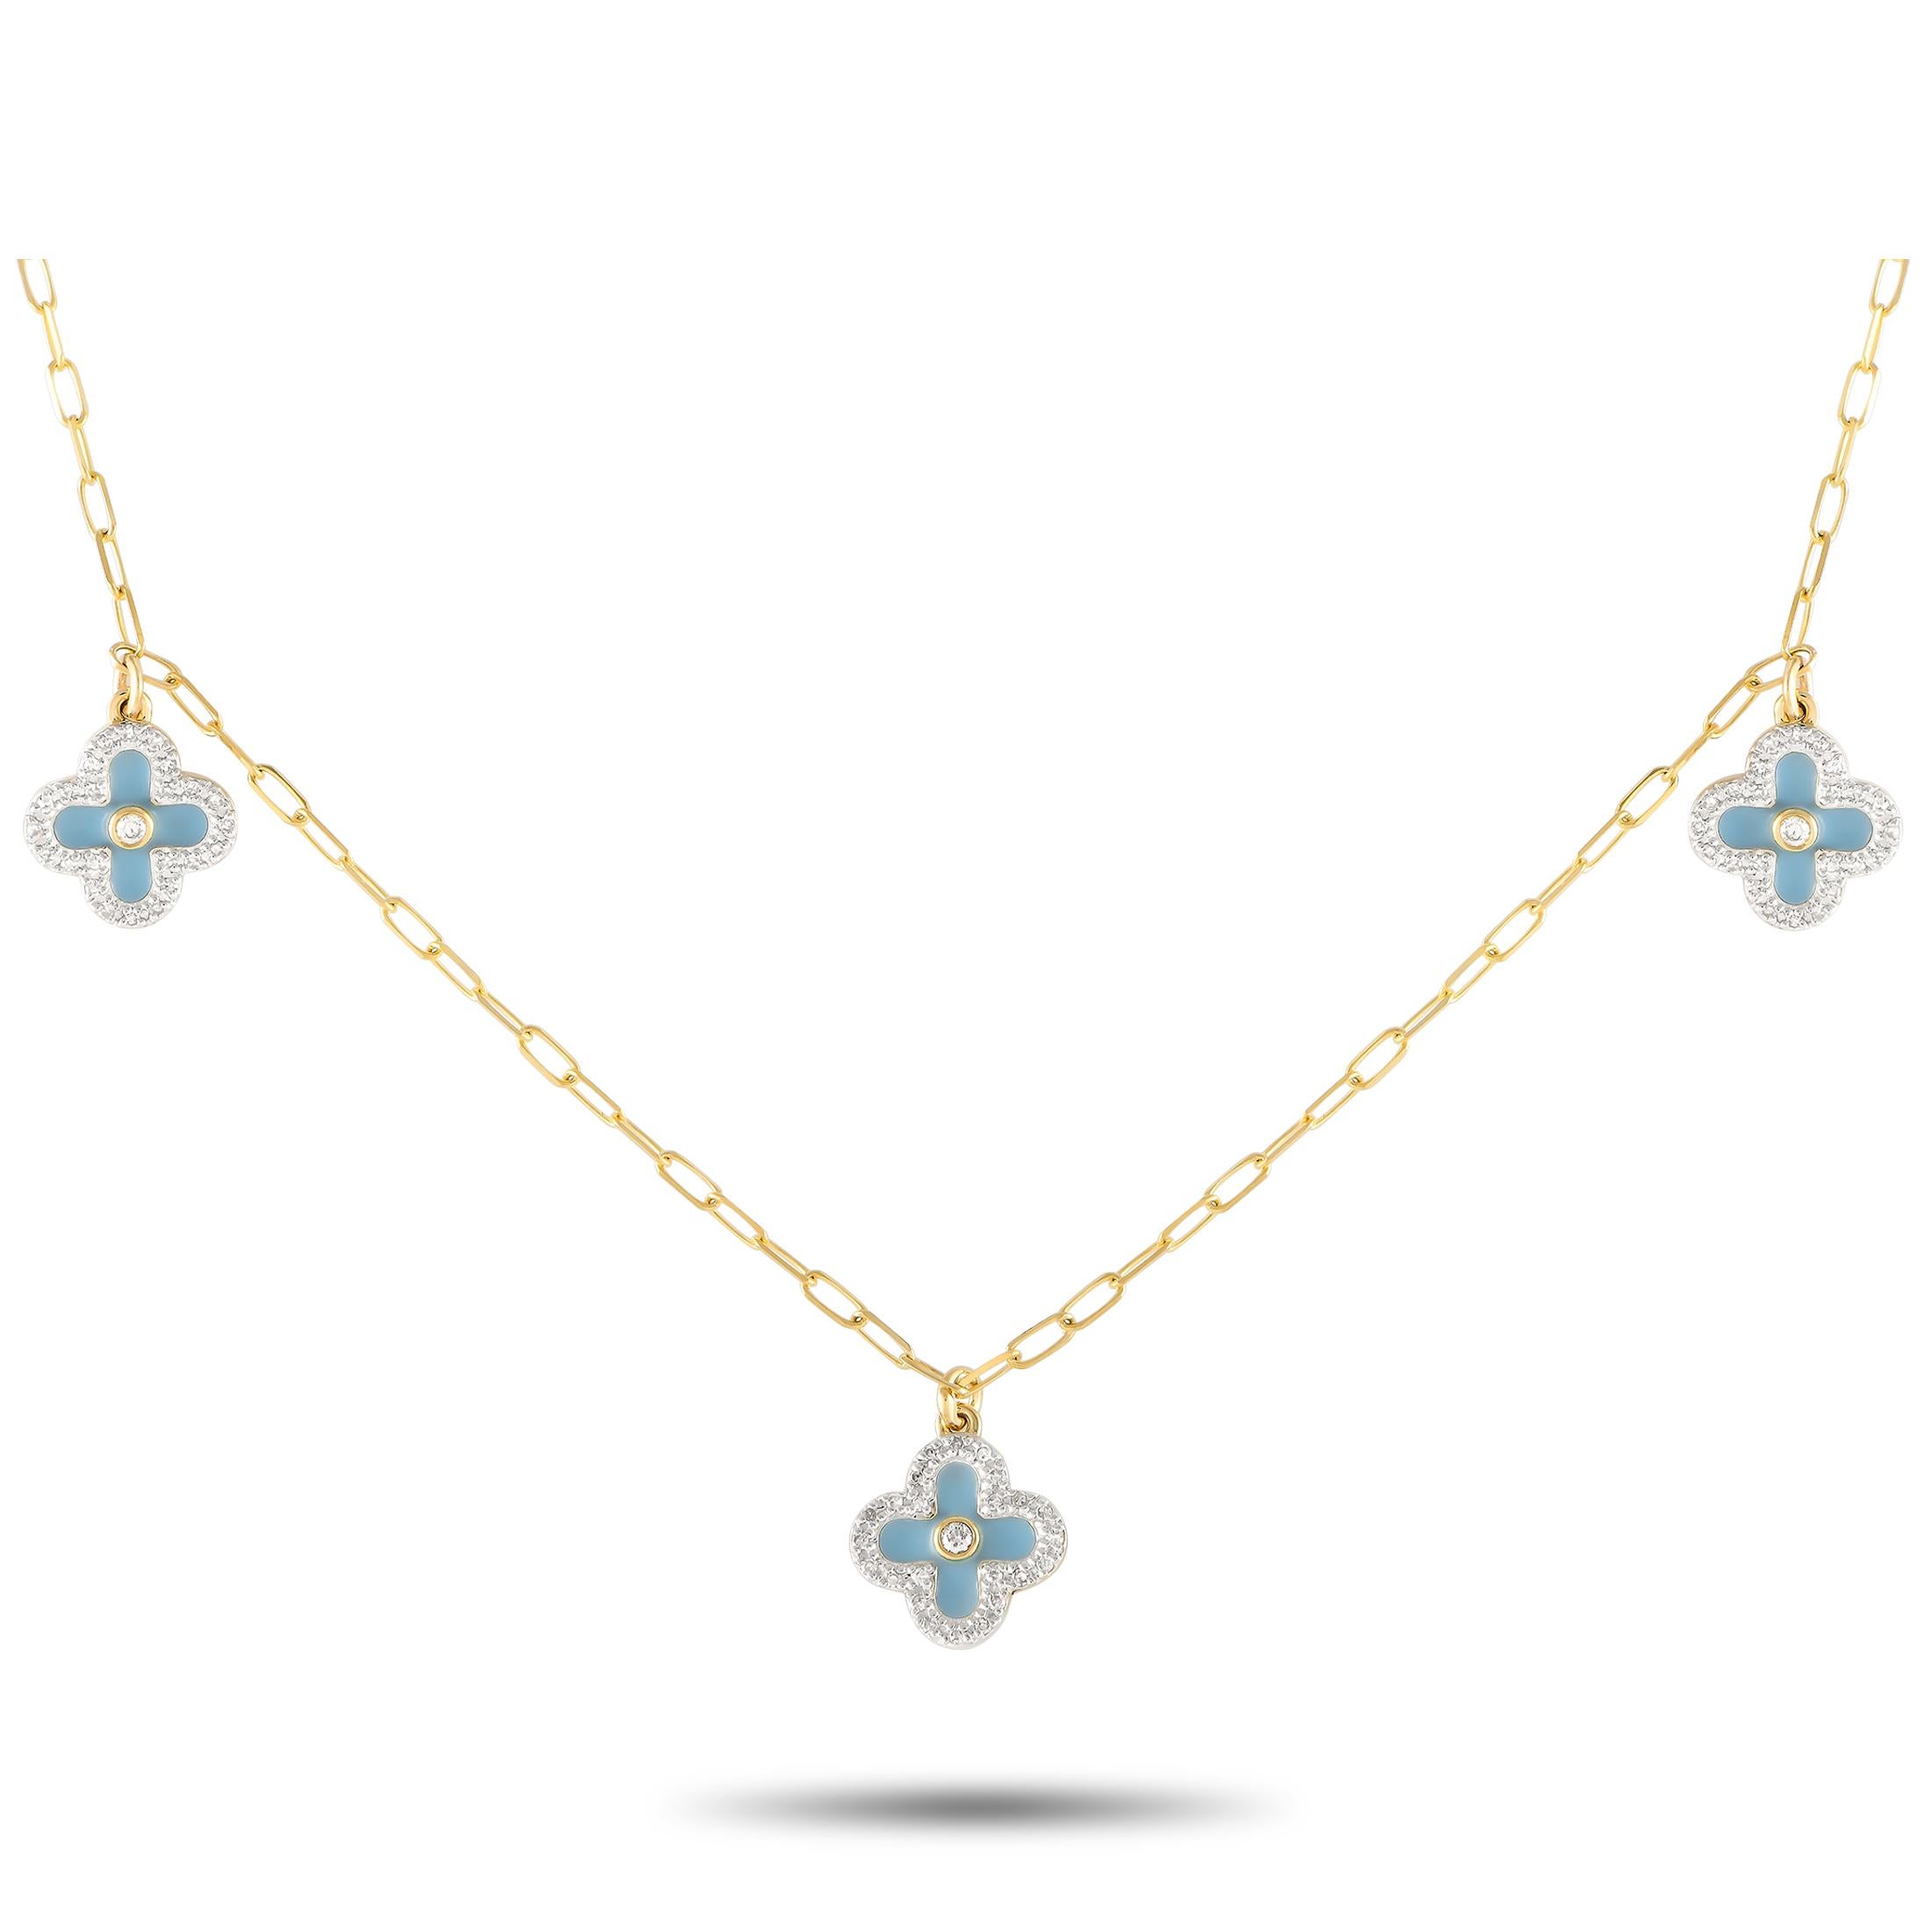 14K Yellow Gold 0.25ct Diamond and Blue Enamel Three Flower Necklace NK01431 In New Condition For Sale In Southampton, PA